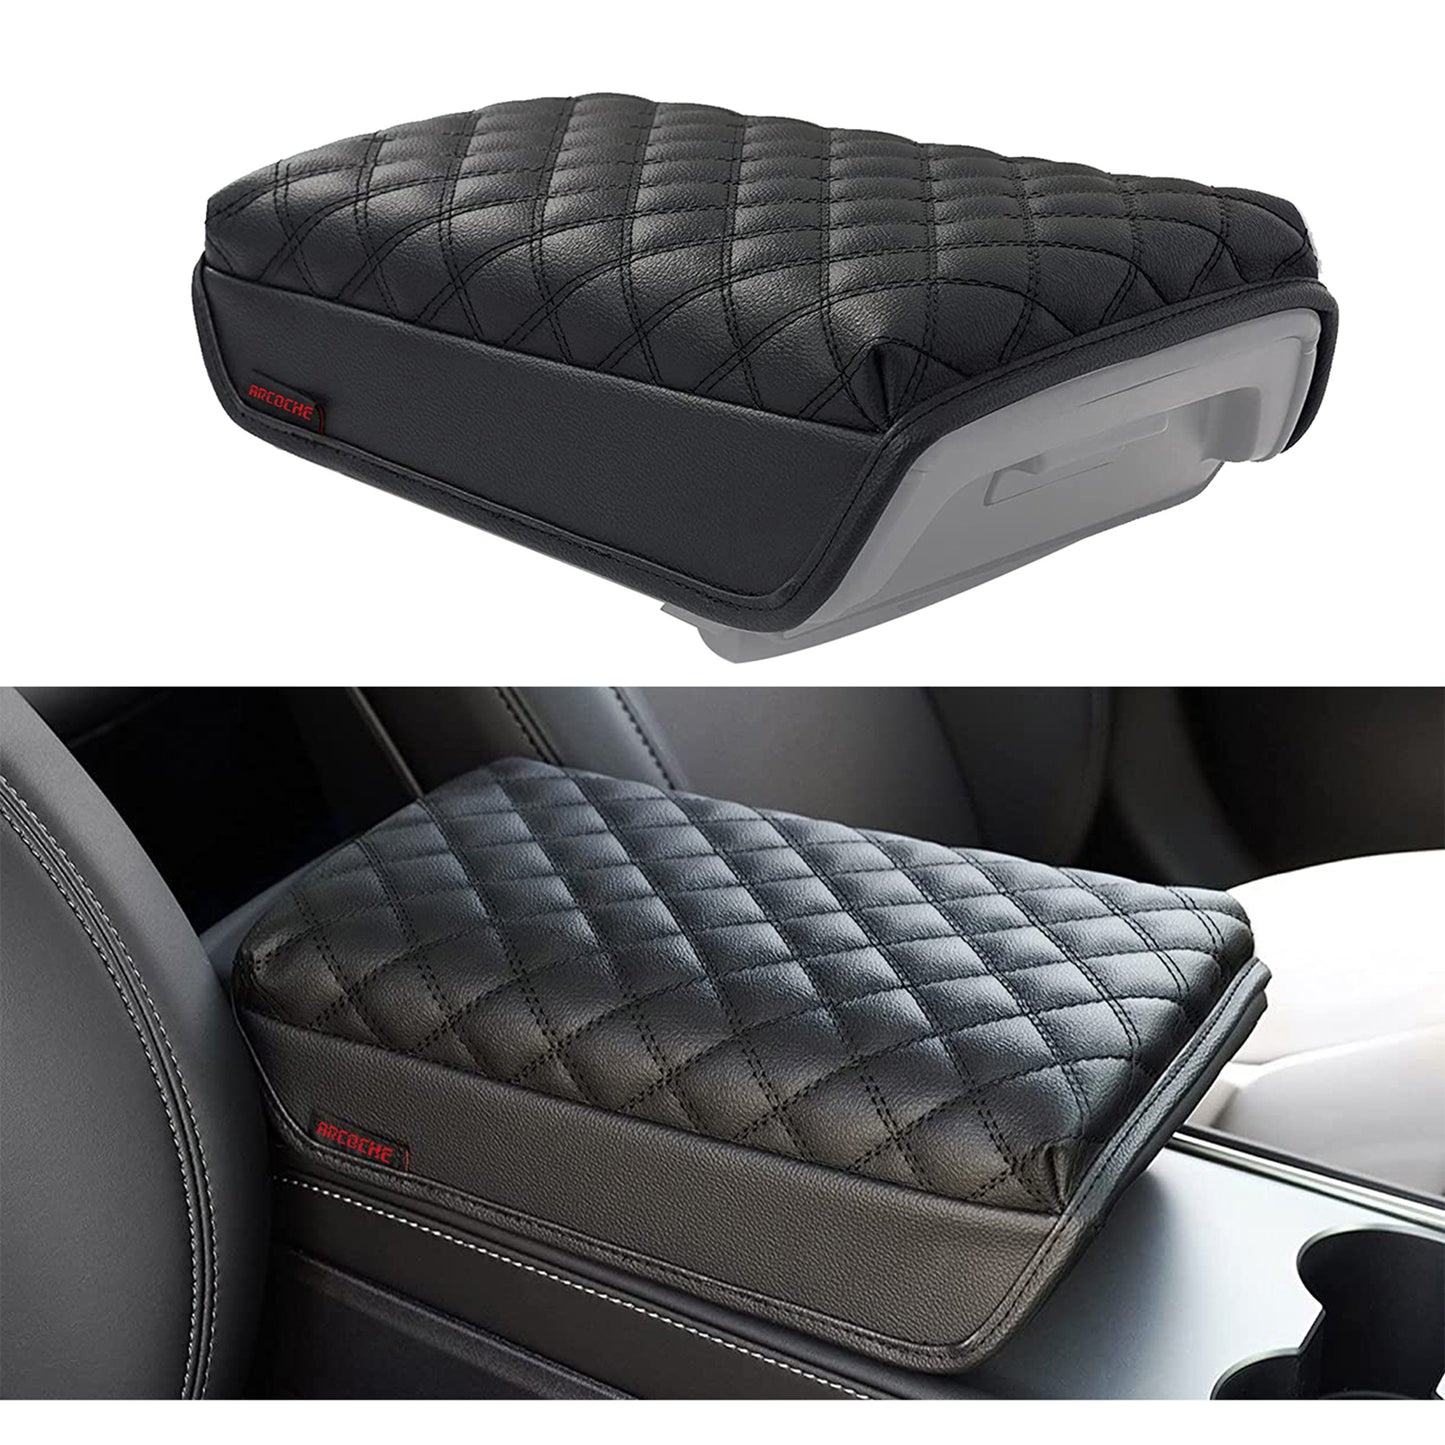 armrest cover pad PU leather center console protect tesla model 3 Y car 2022 2023 2021 arcoche accessories accessory aftermarket price Vehicles standard long range performance sr+ electric car rwd ev interior exterior diy decoration price elon musk must have black white red blue 5 7 seats seat